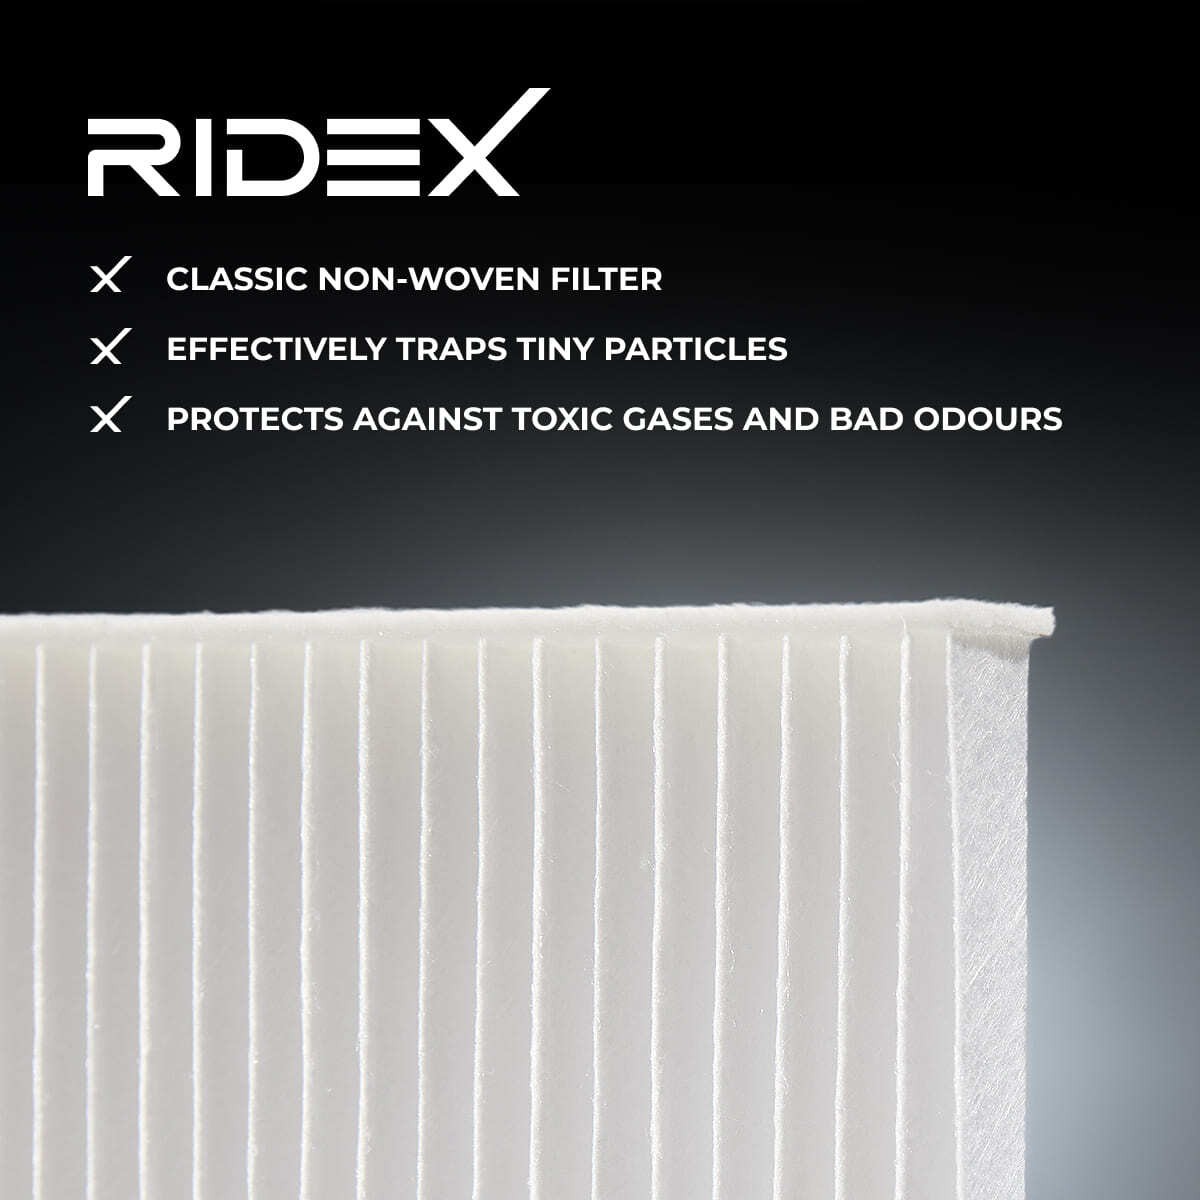 424I0482 Air con filter 424I0482 RIDEX with Odour Absorbent Effect, Activated Carbon Filter, Filter Insert, 246 mm x 156 mm x 30 mm